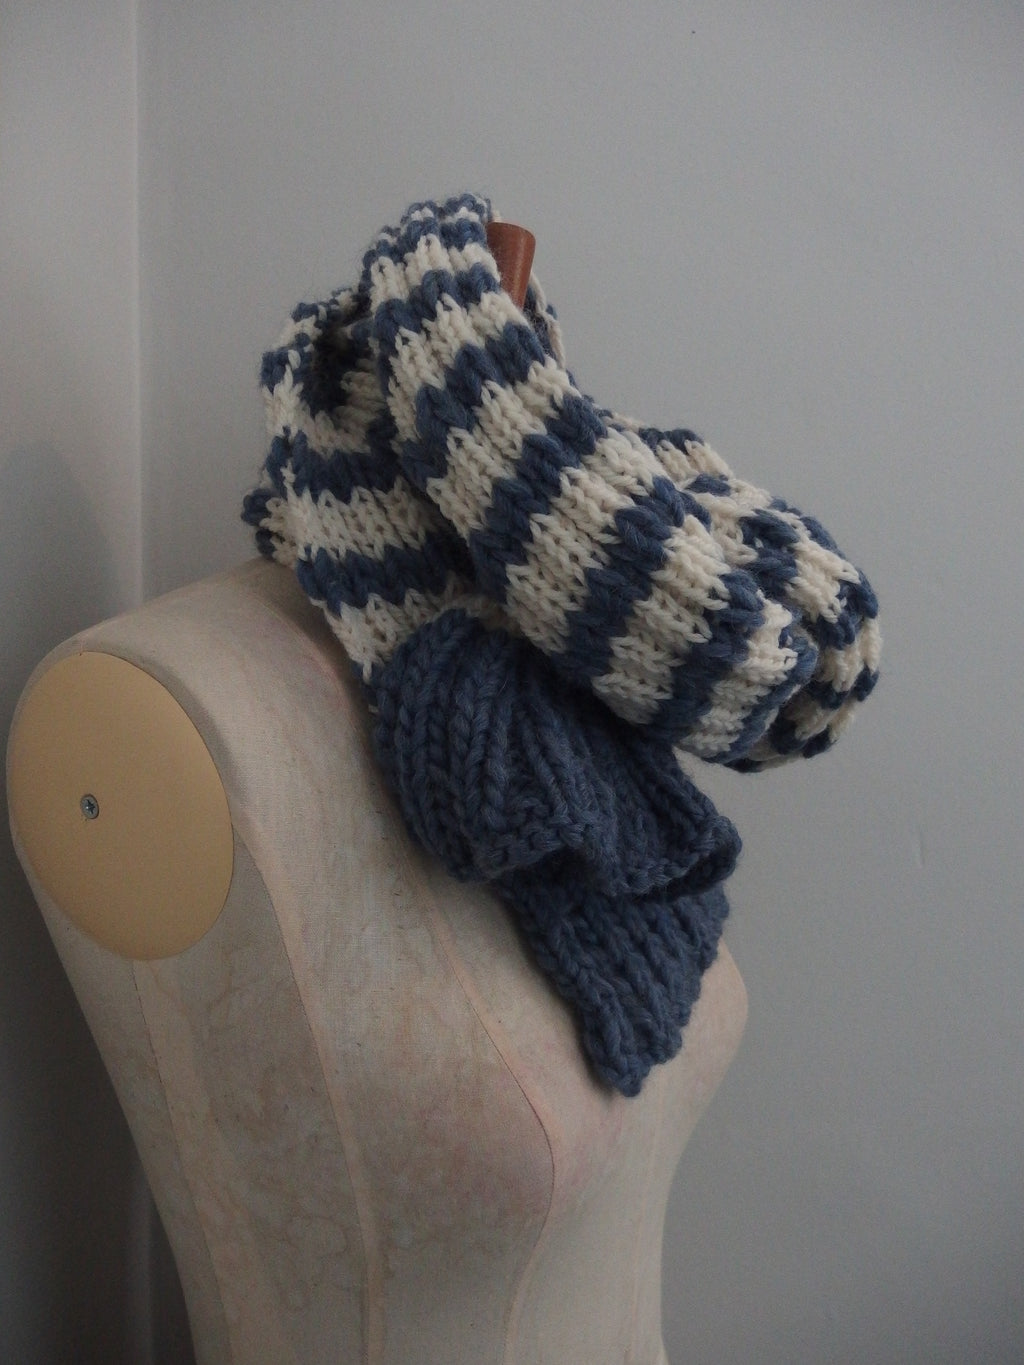 Big Scarf - Extraordinarily soft 100% wool - Petrol Blue and Off White